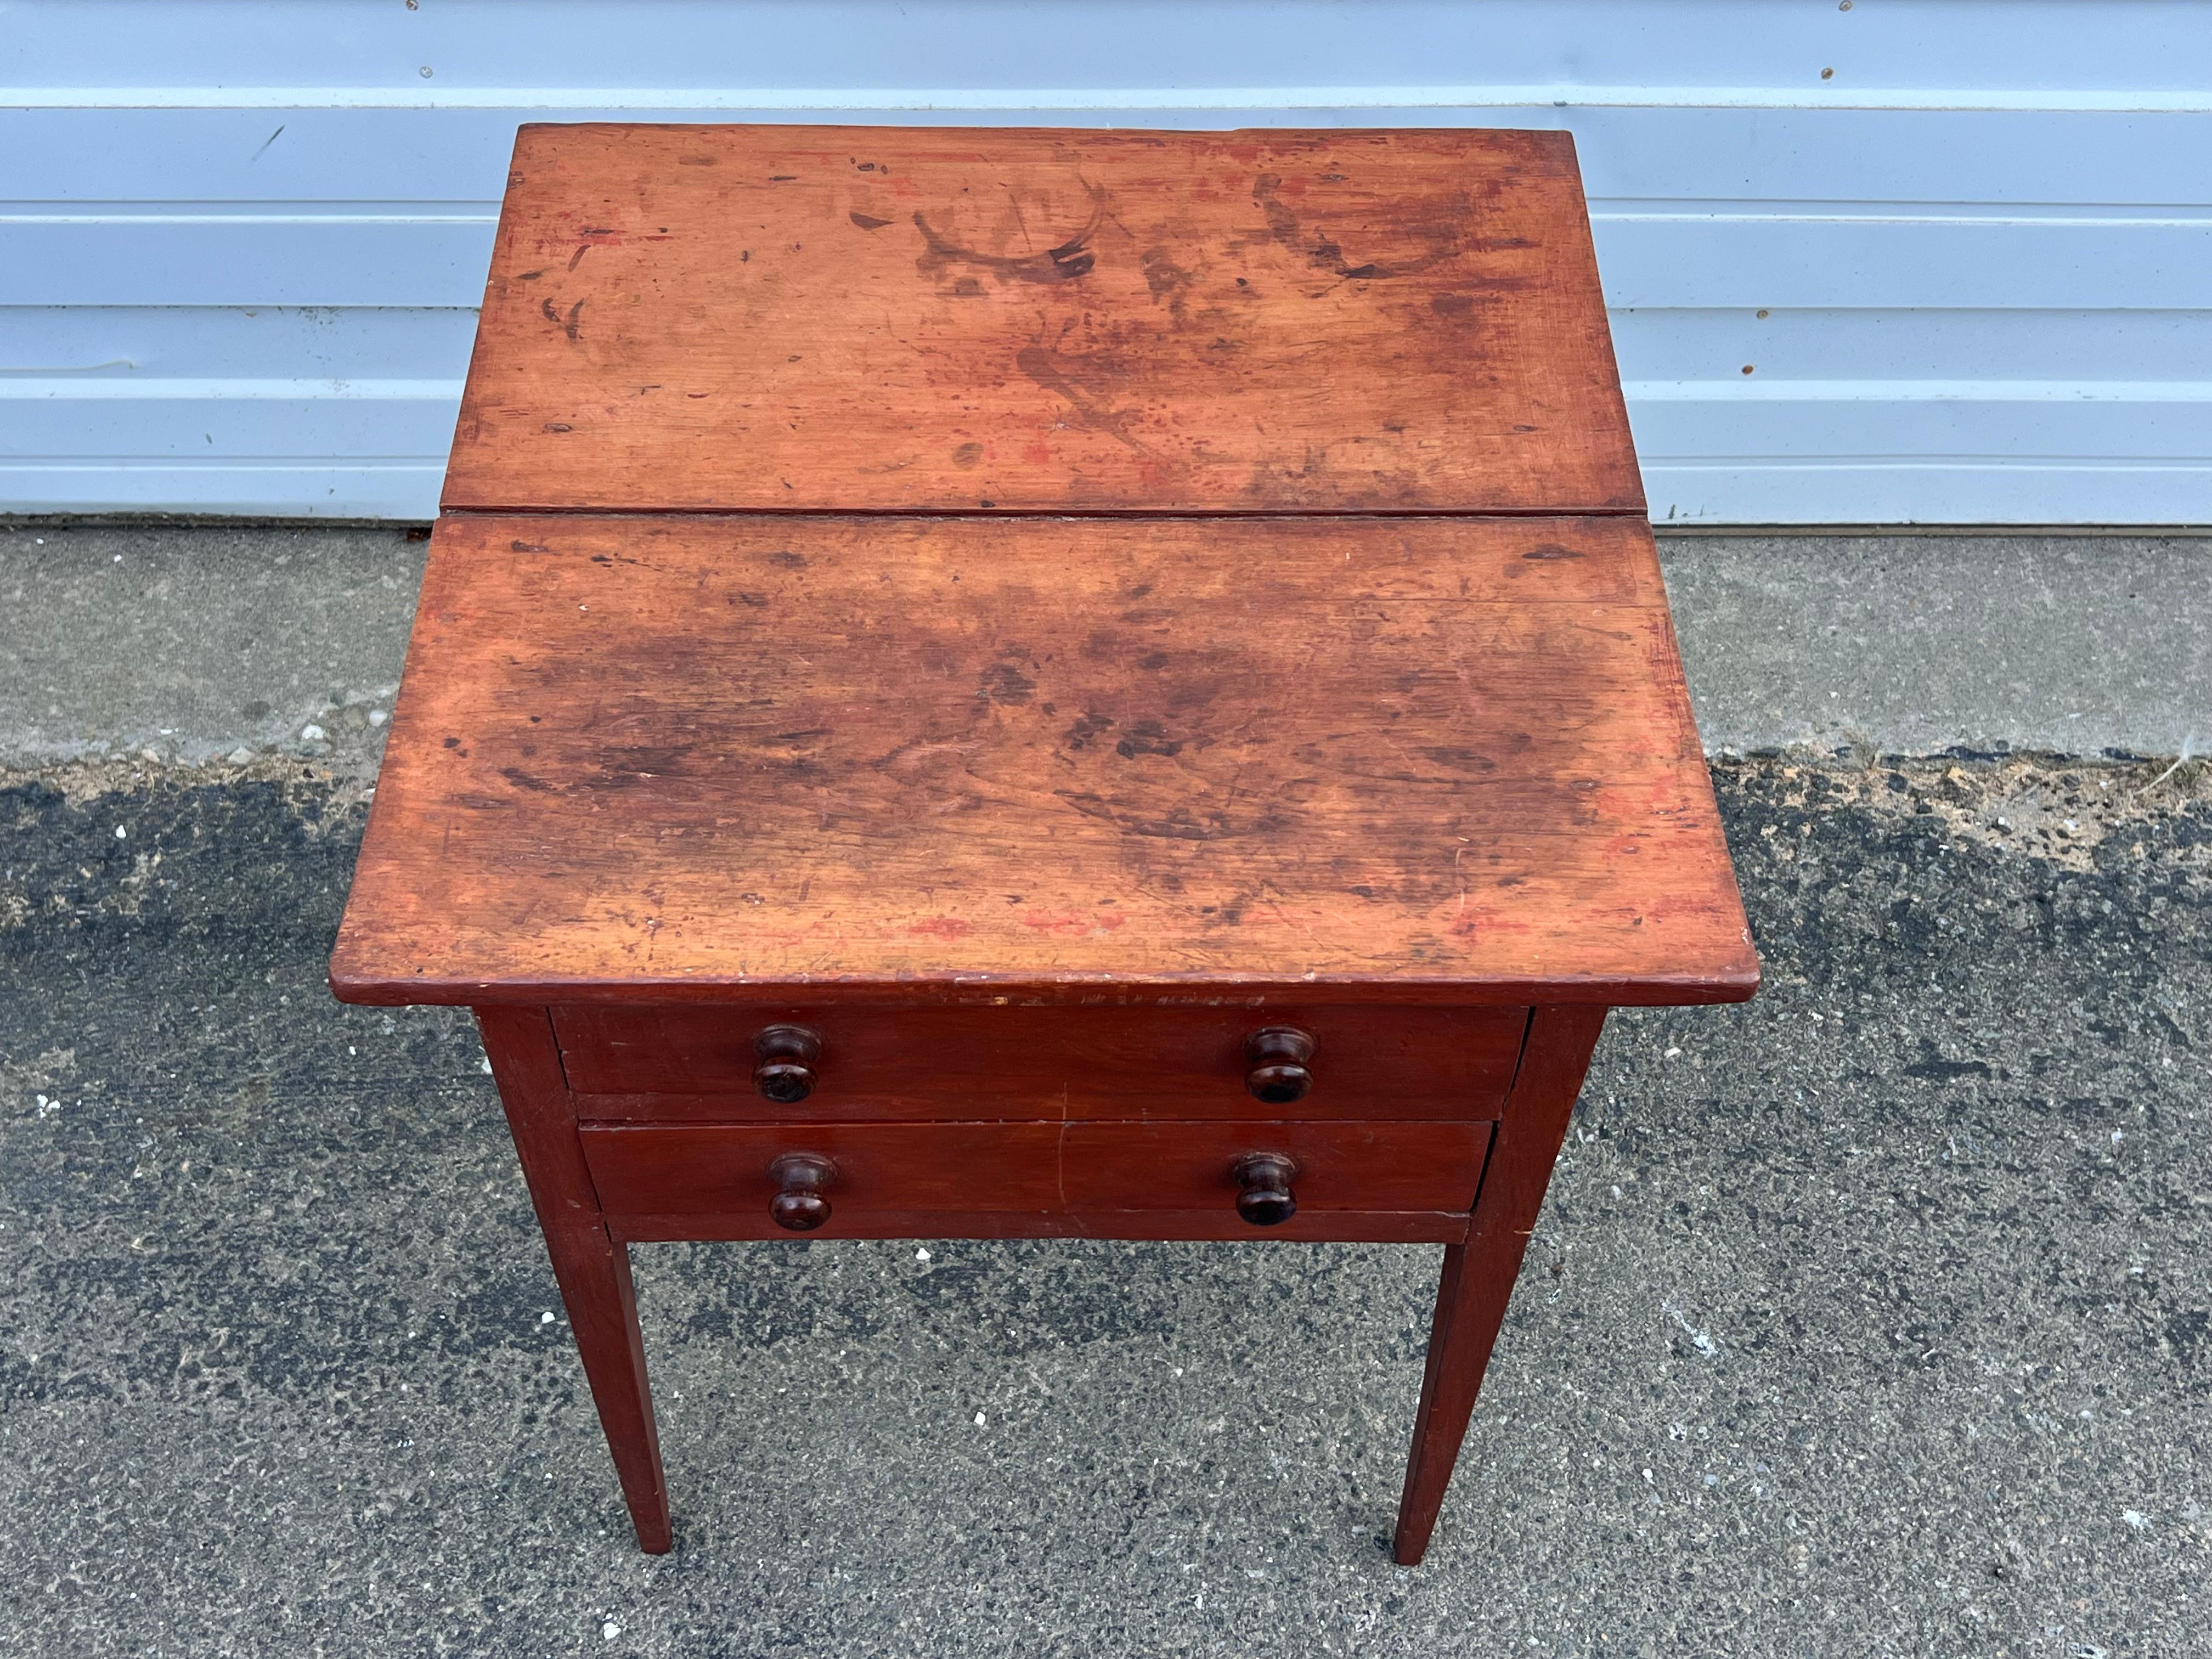 19th century two drawer side table in original red paint.  With two board, tongue and groove top, two drawers with turned wooden knobs, on tapered legs. 